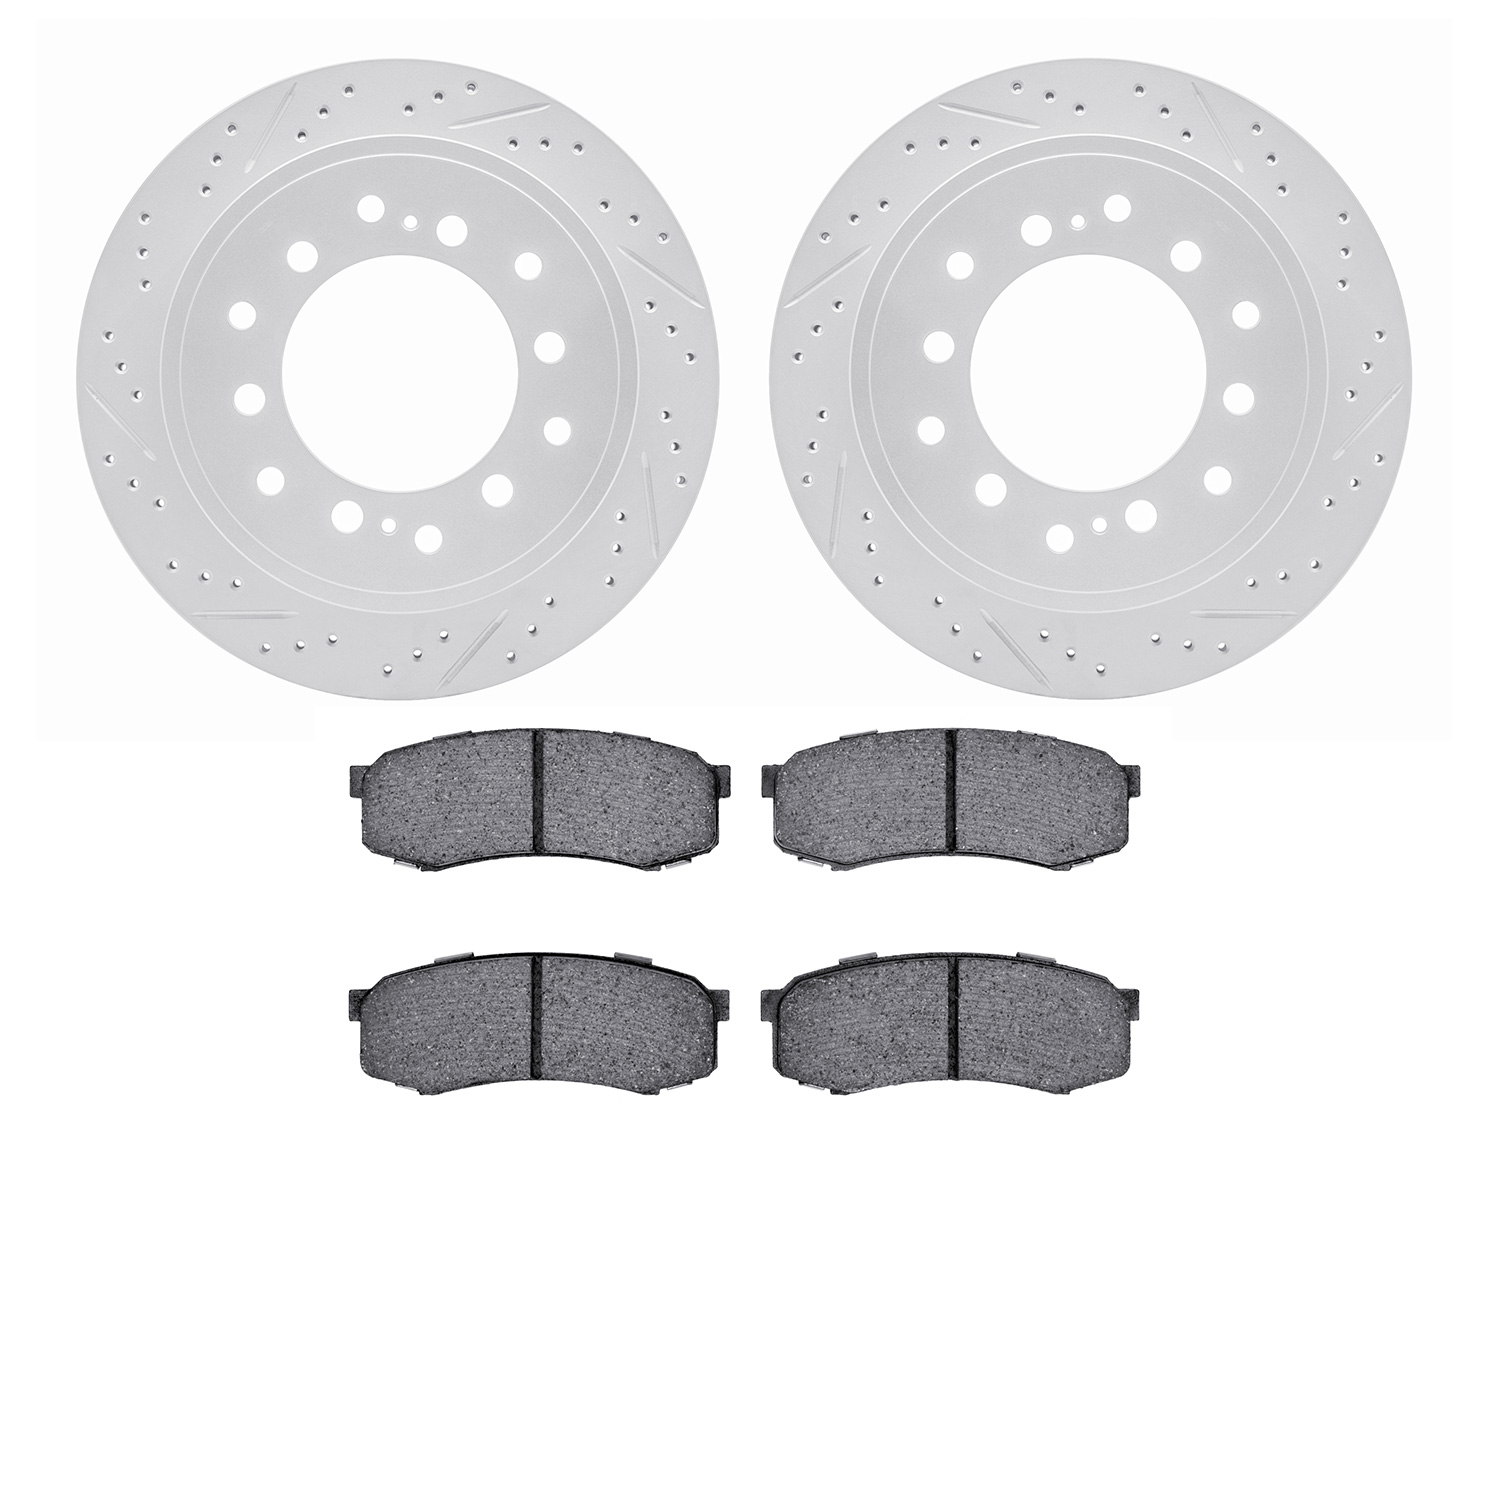 2502-76100 Geoperformance Drilled/Slotted Rotors w/5000 Advanced Brake Pads Kit, Fits Select Lexus/Toyota/Scion, Position: Rear